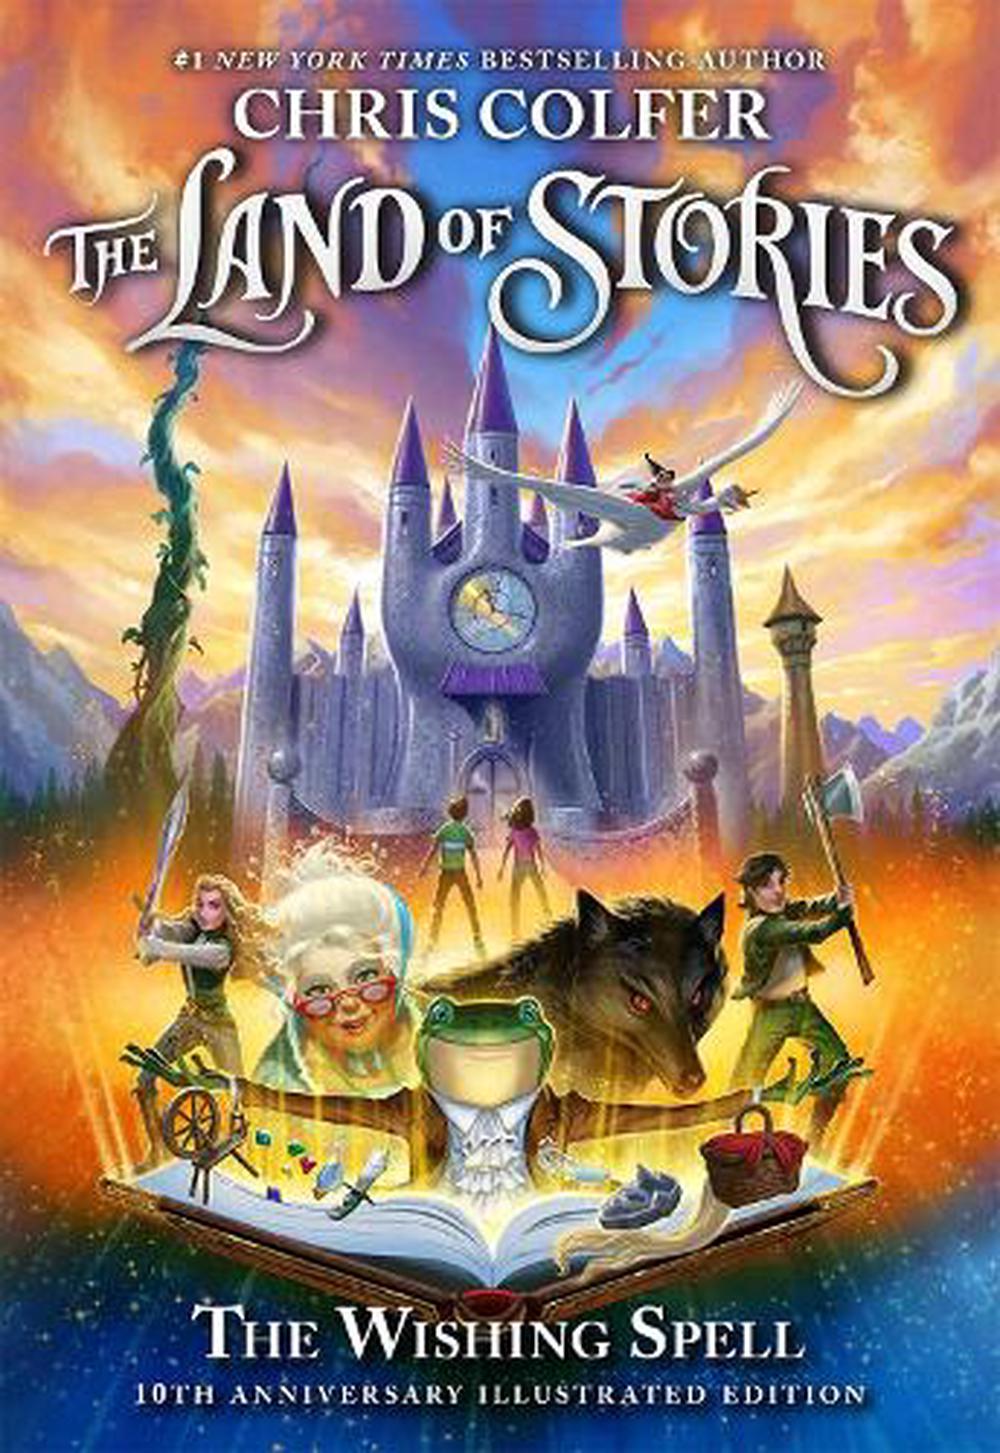 The Land of Stories the Wishing Spell 10th Anniversary Illustrated Edition by Chris Colfer